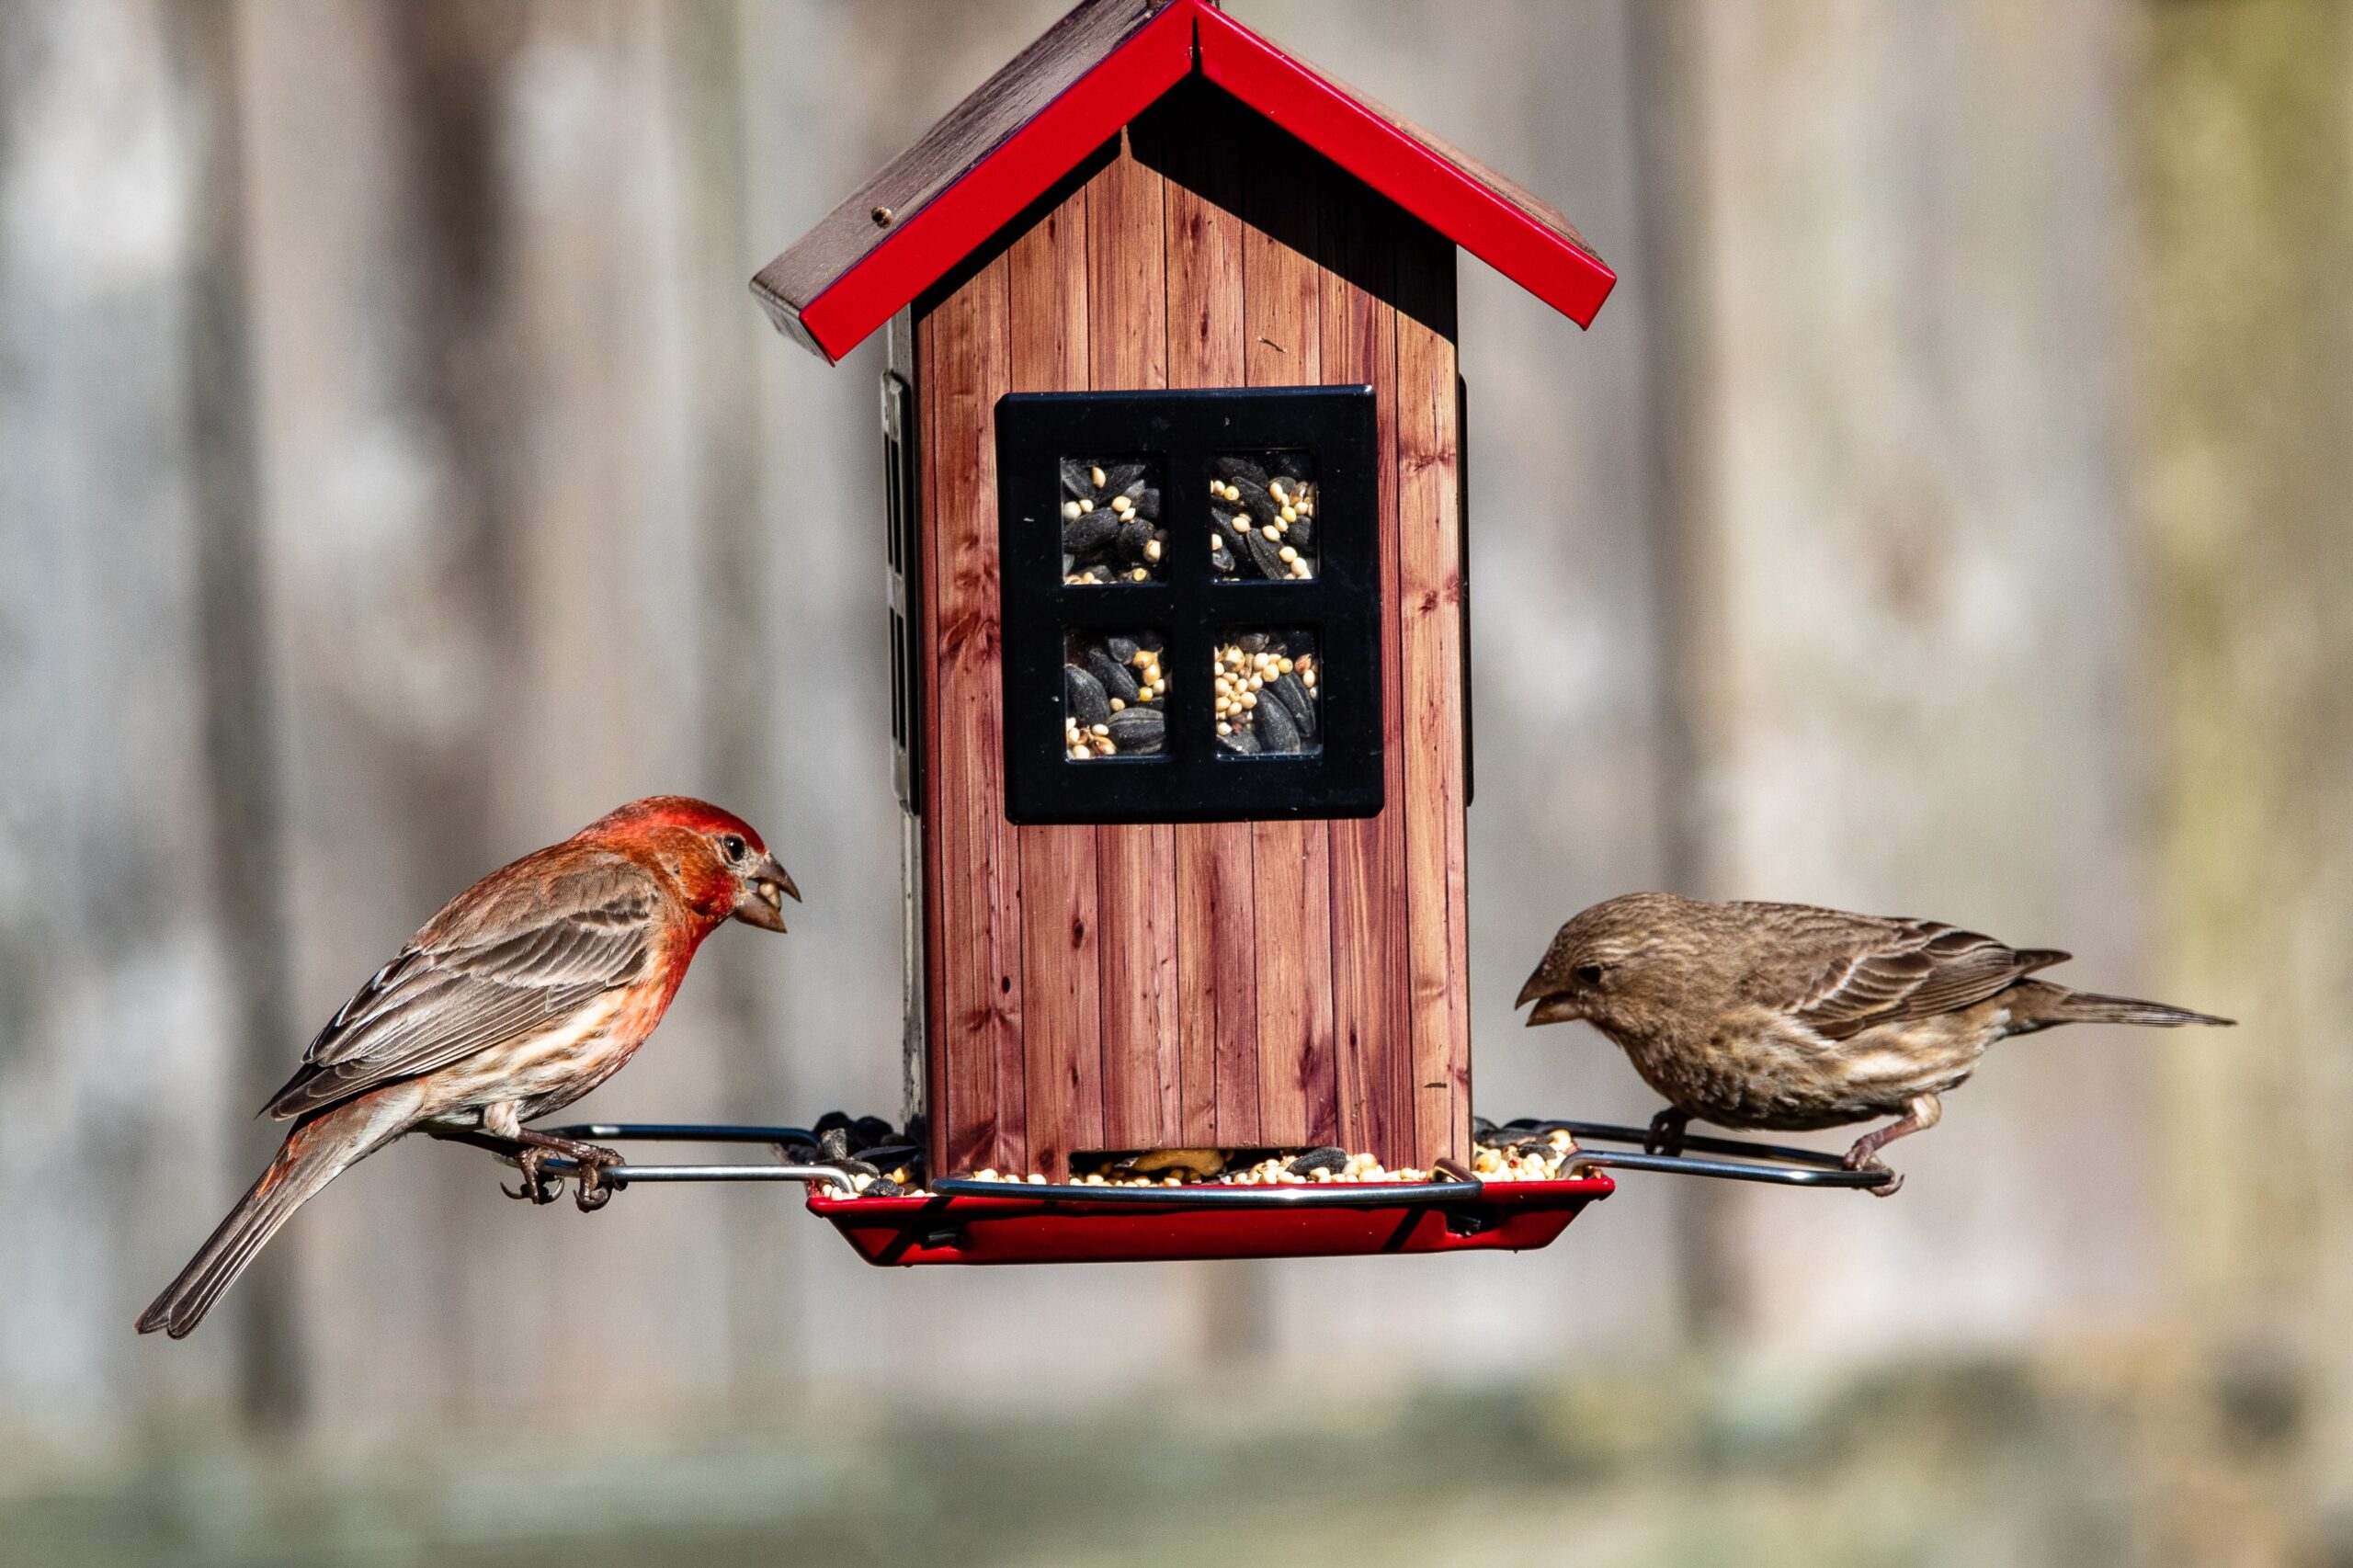 Two birds eating from a log cabin bird feeder